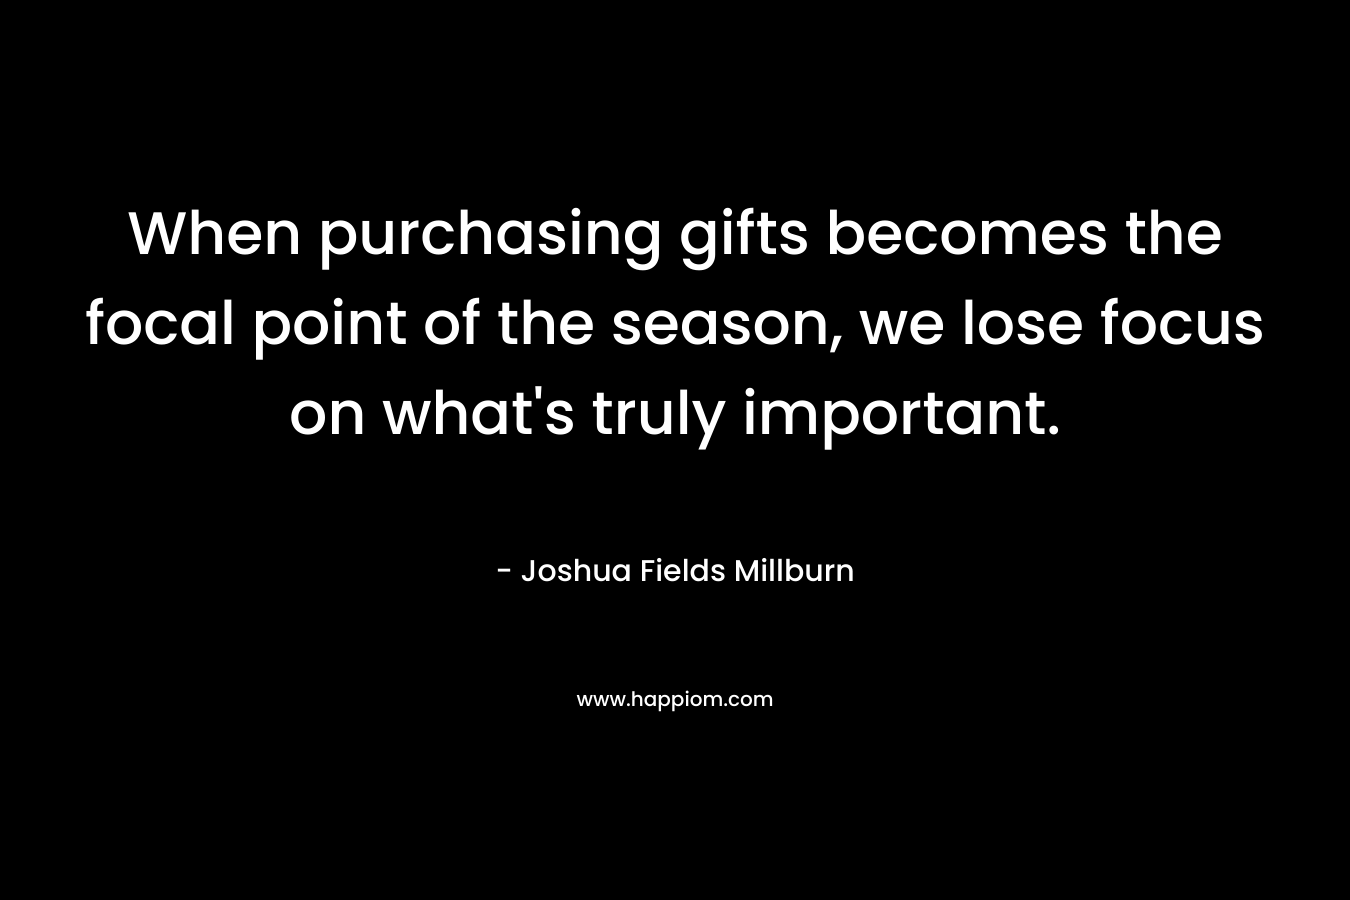 When purchasing gifts becomes the focal point of the season, we lose focus on what's truly important.